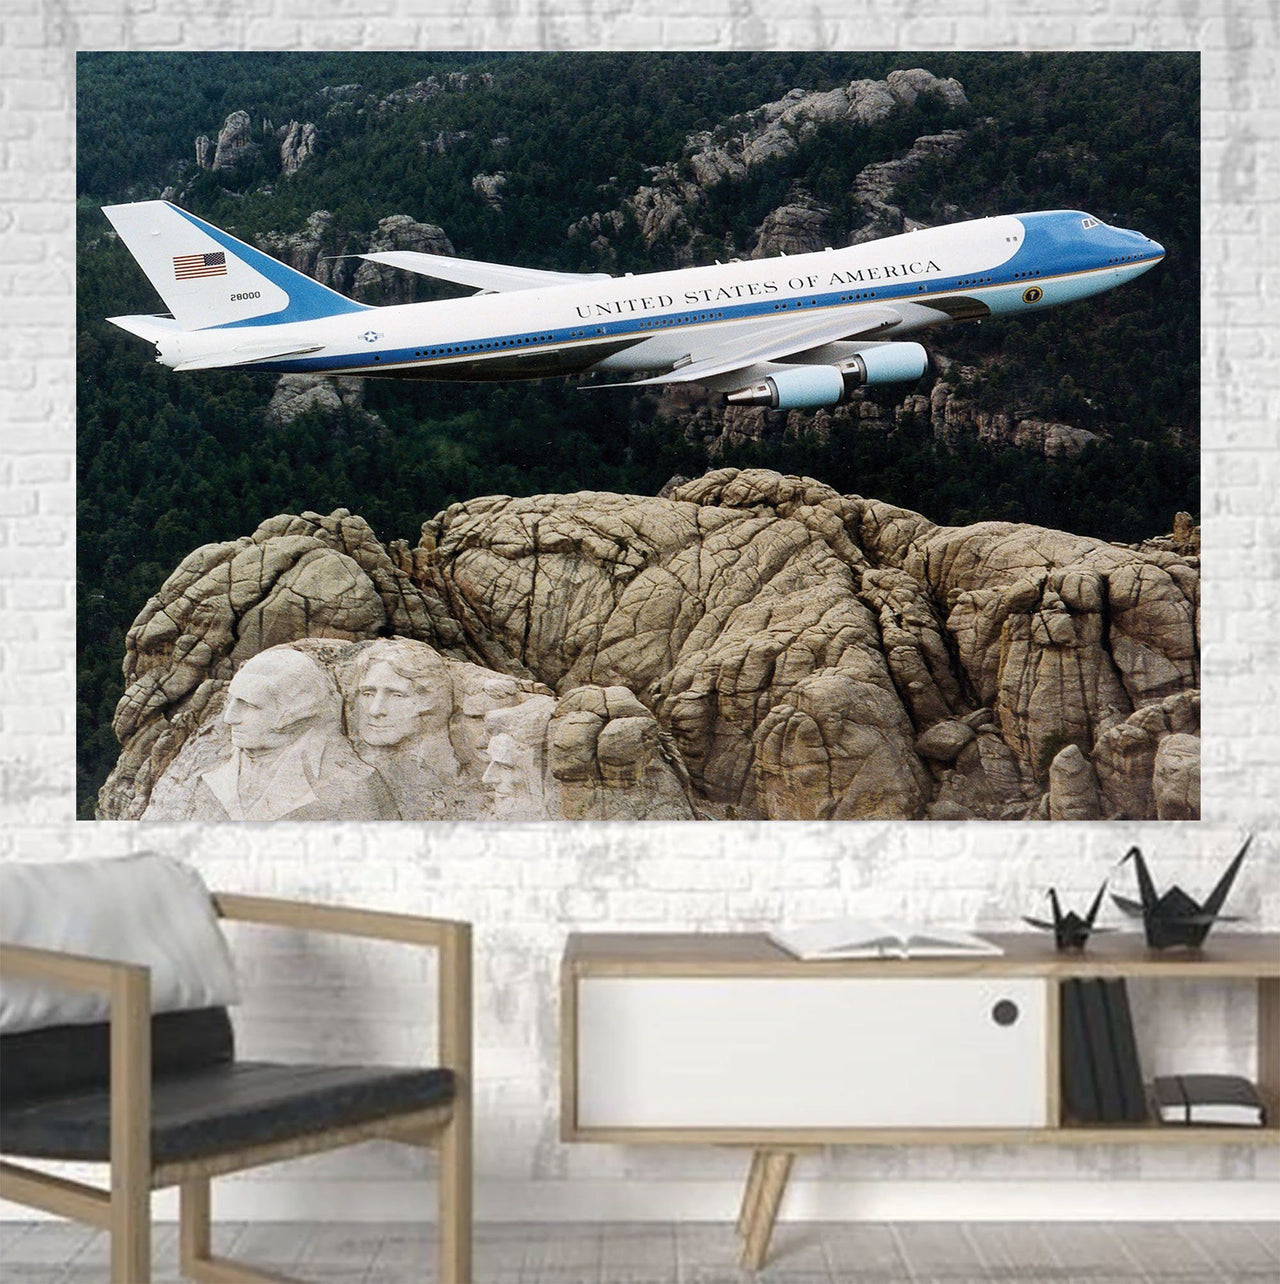 Cruising United States of America Boeing 747 Printed Canvas Posters (1 Piece) Aviation Shop 